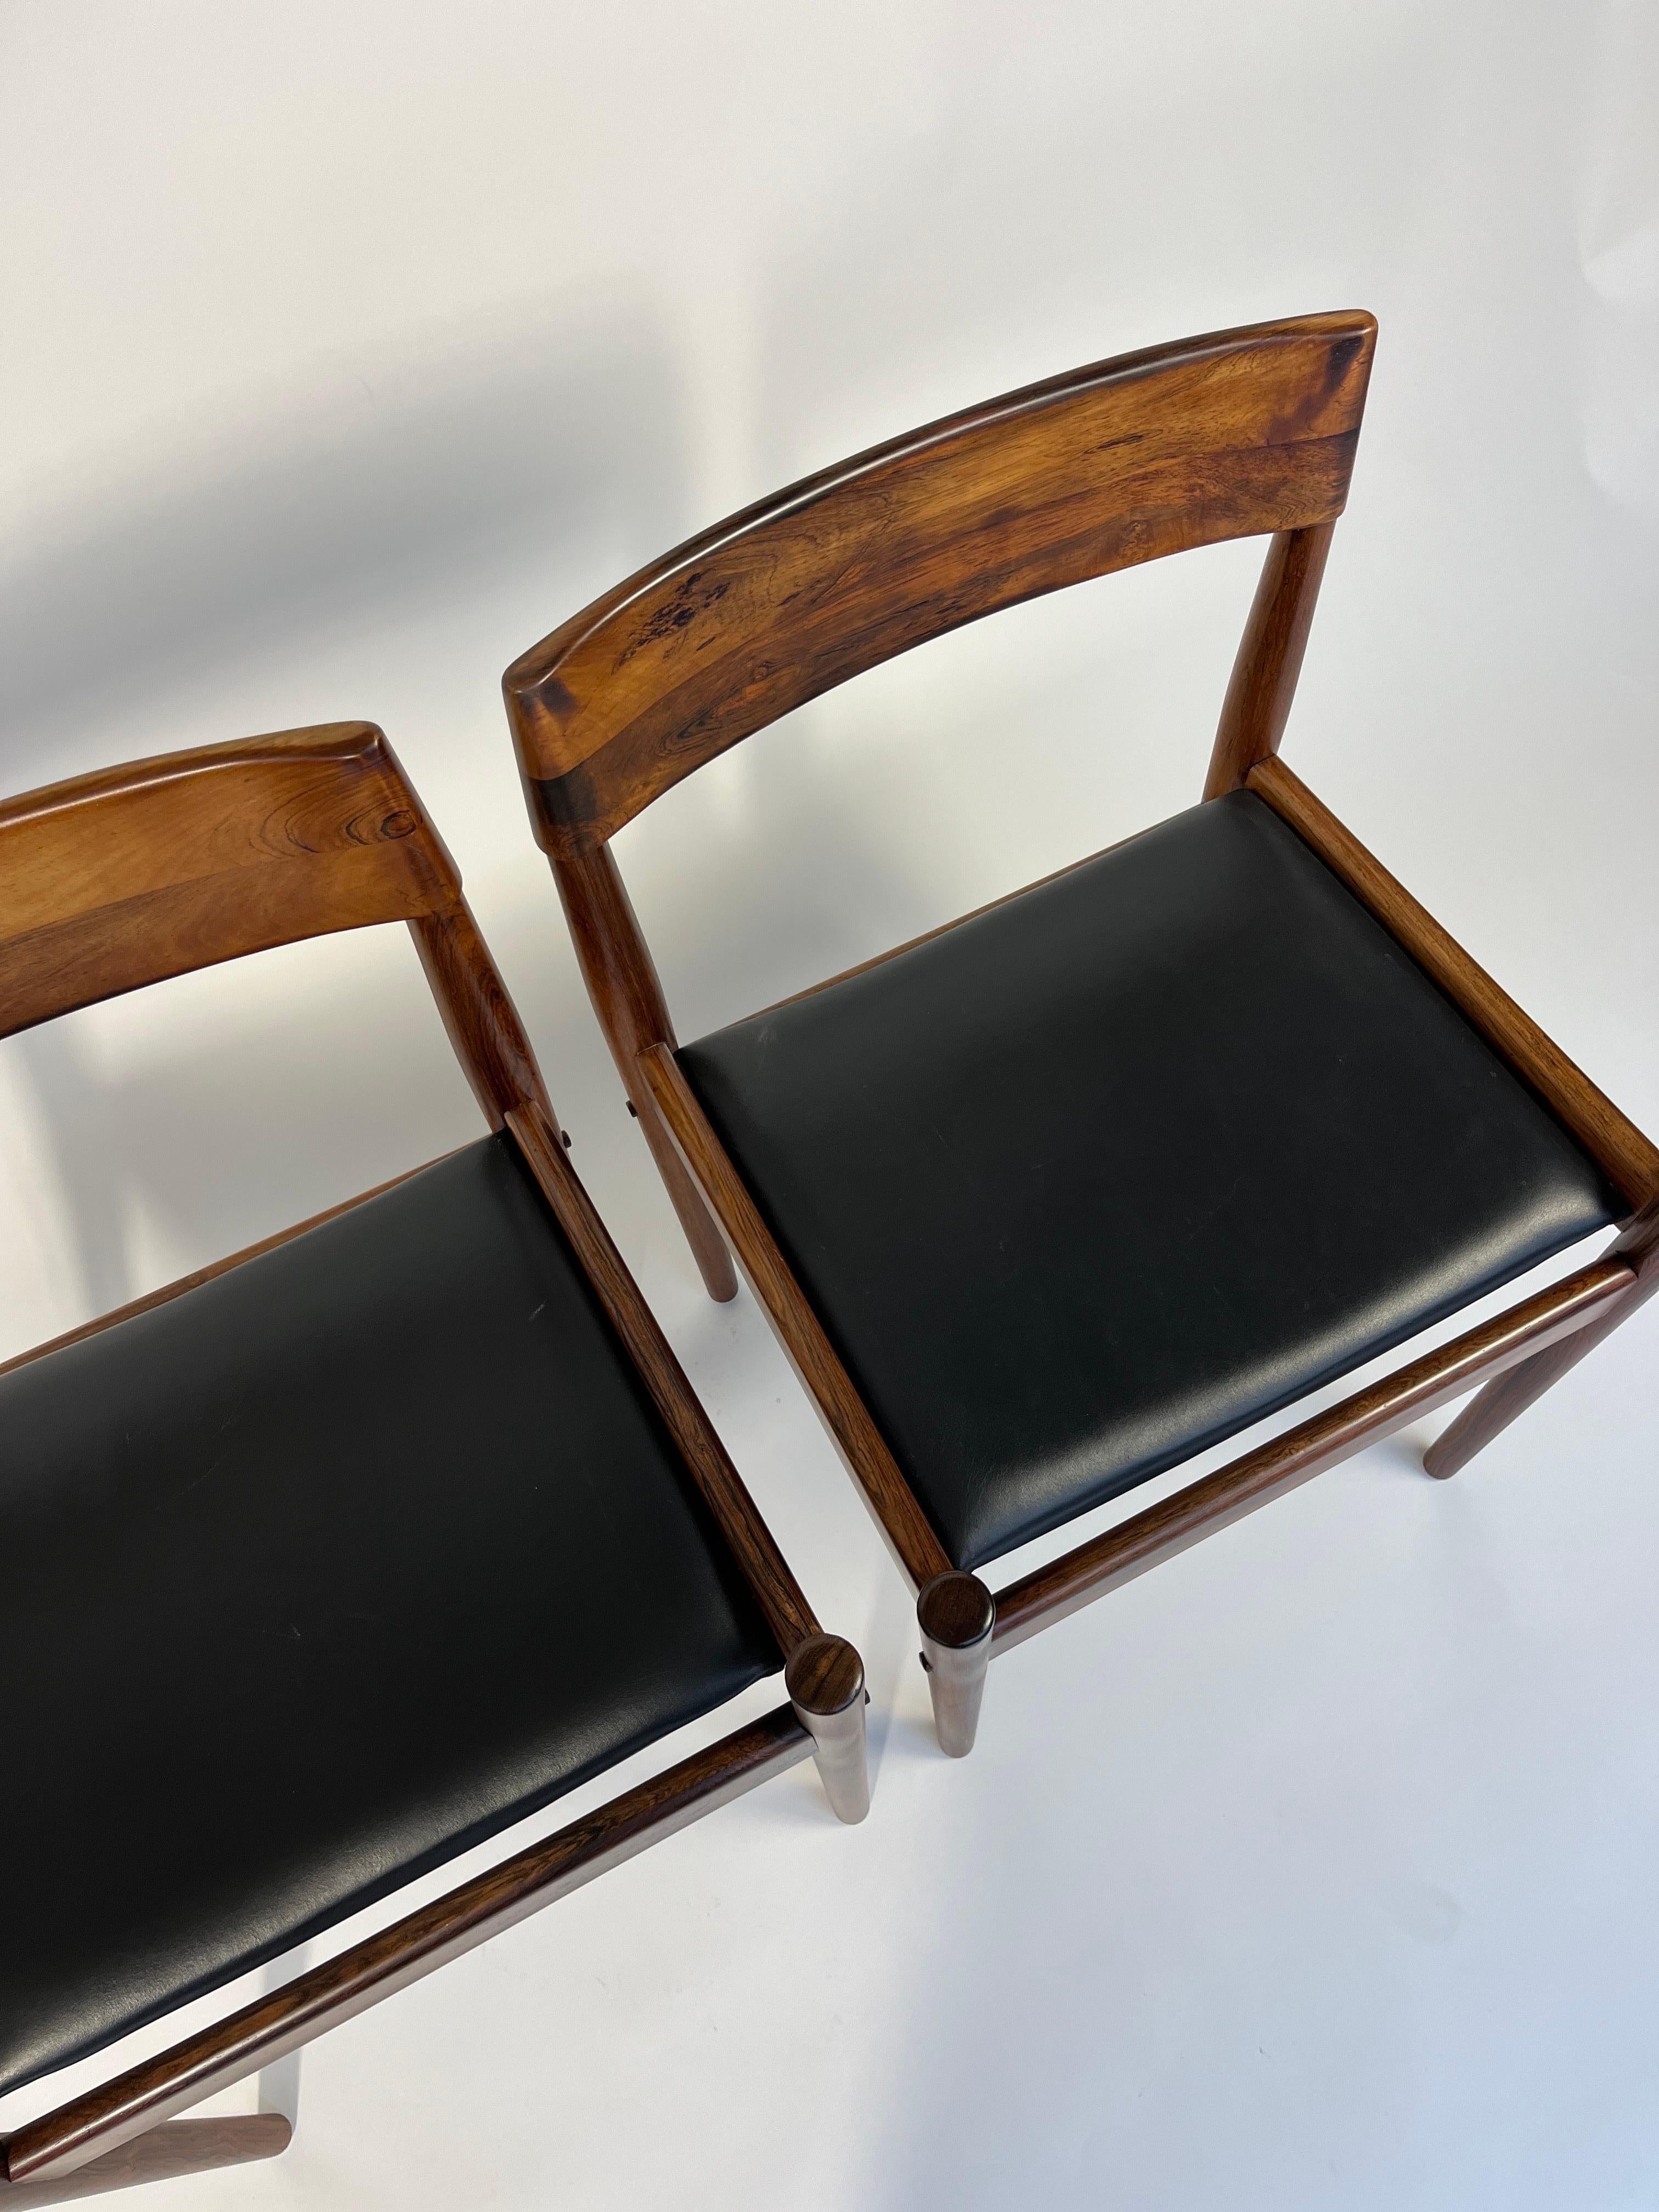 Pair of Grete Jalk Dining Chairs Rosewood P Jeppesen Denmark 1960s For Sale 4